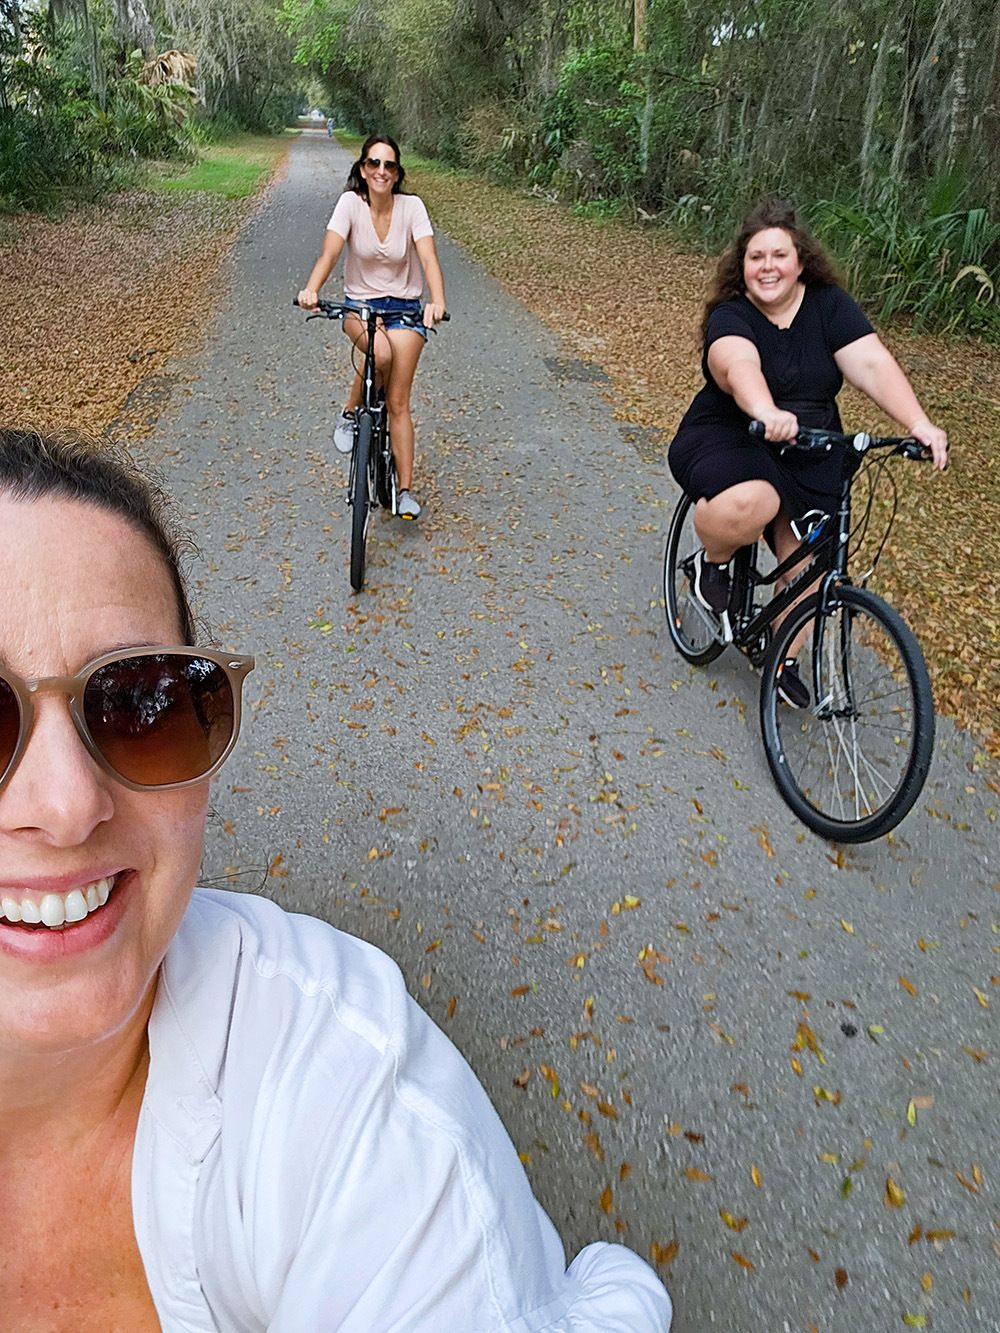 Bike Rentals on a Girl's Trip! Travel Tips for A Visit to Inverness FL. A recap of where we stayed, fun outdoor activities to try, and delicious restaurants for a small-town girls' trip!